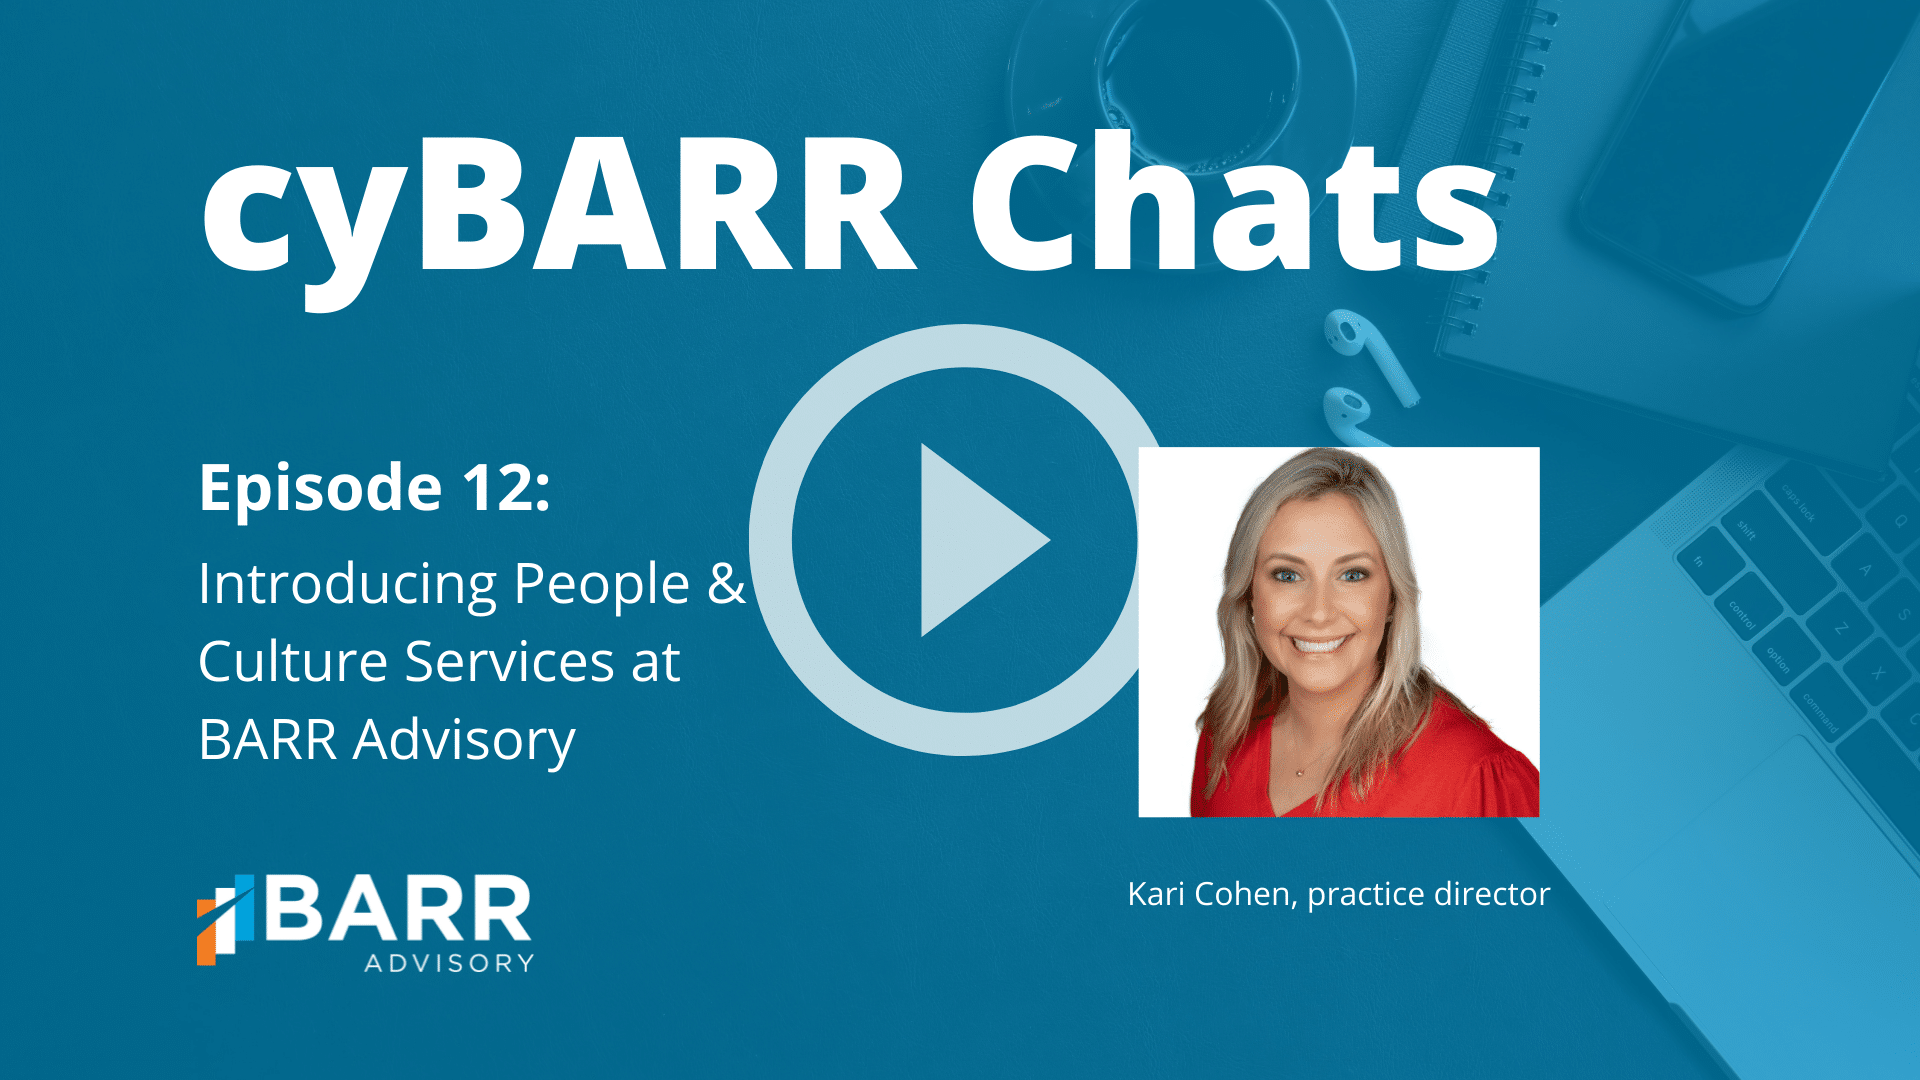 cyBARR Chats: Introducing People & Culture Services at BARR Advisory